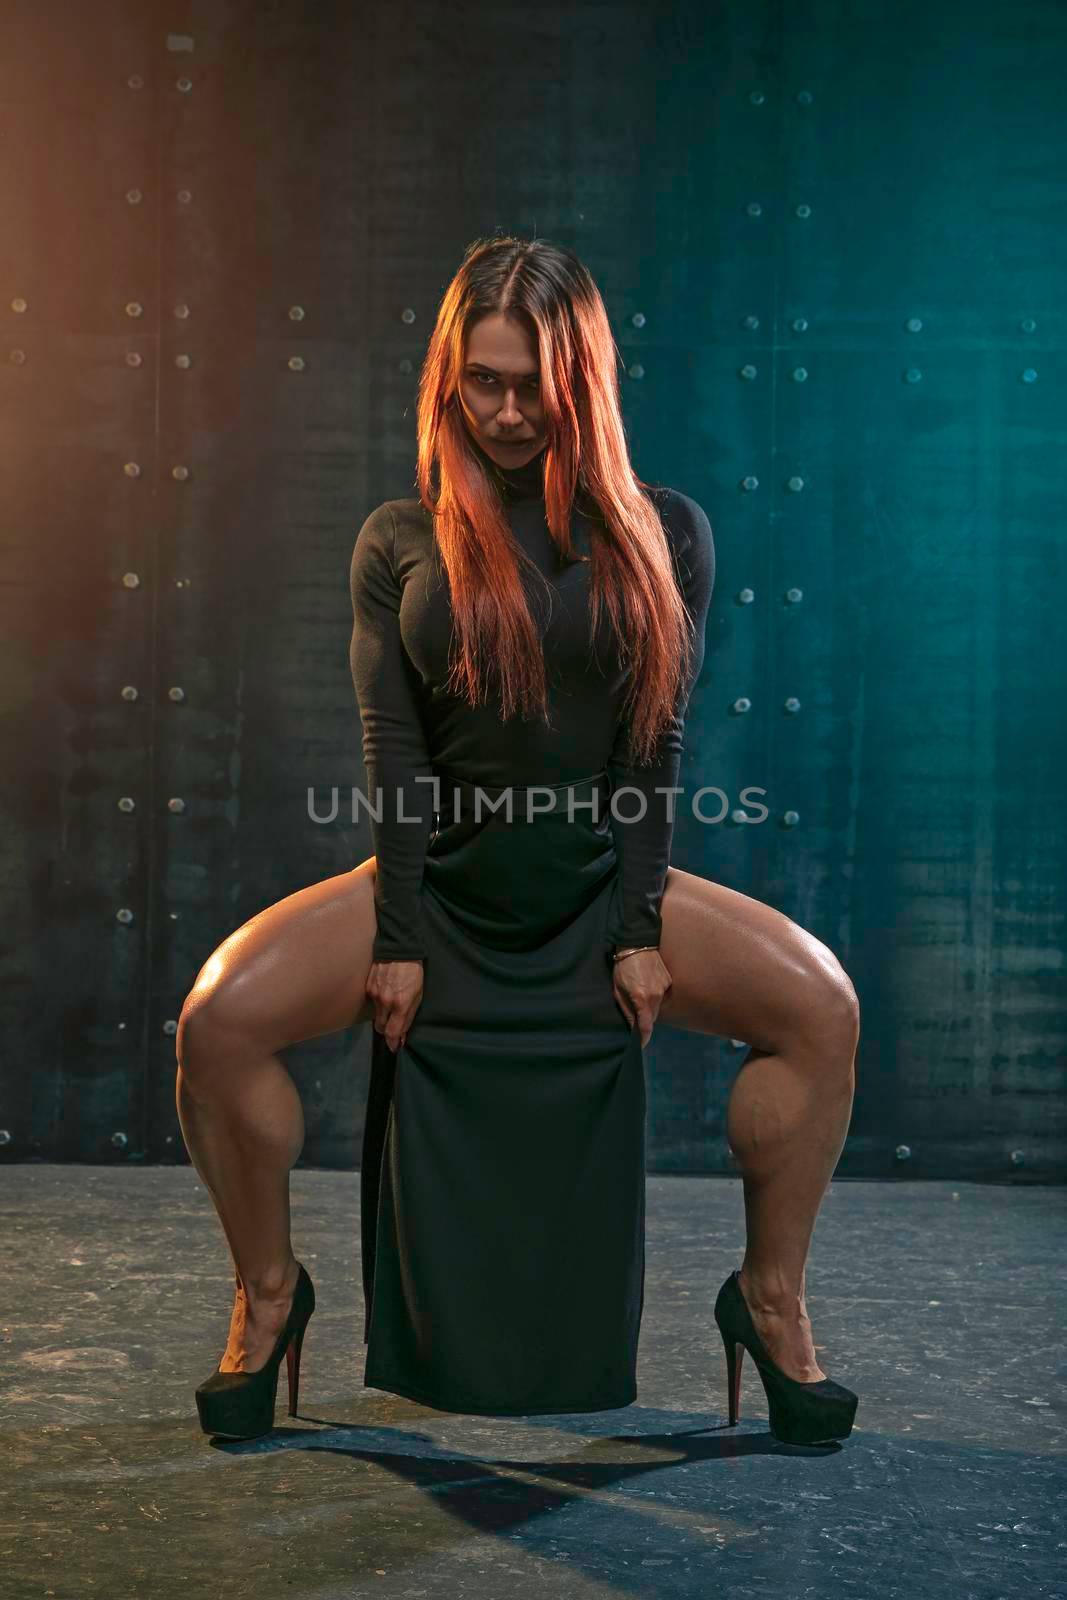 Attractive redhead girl in black plunging dress demonstrates athletic legs with big calves